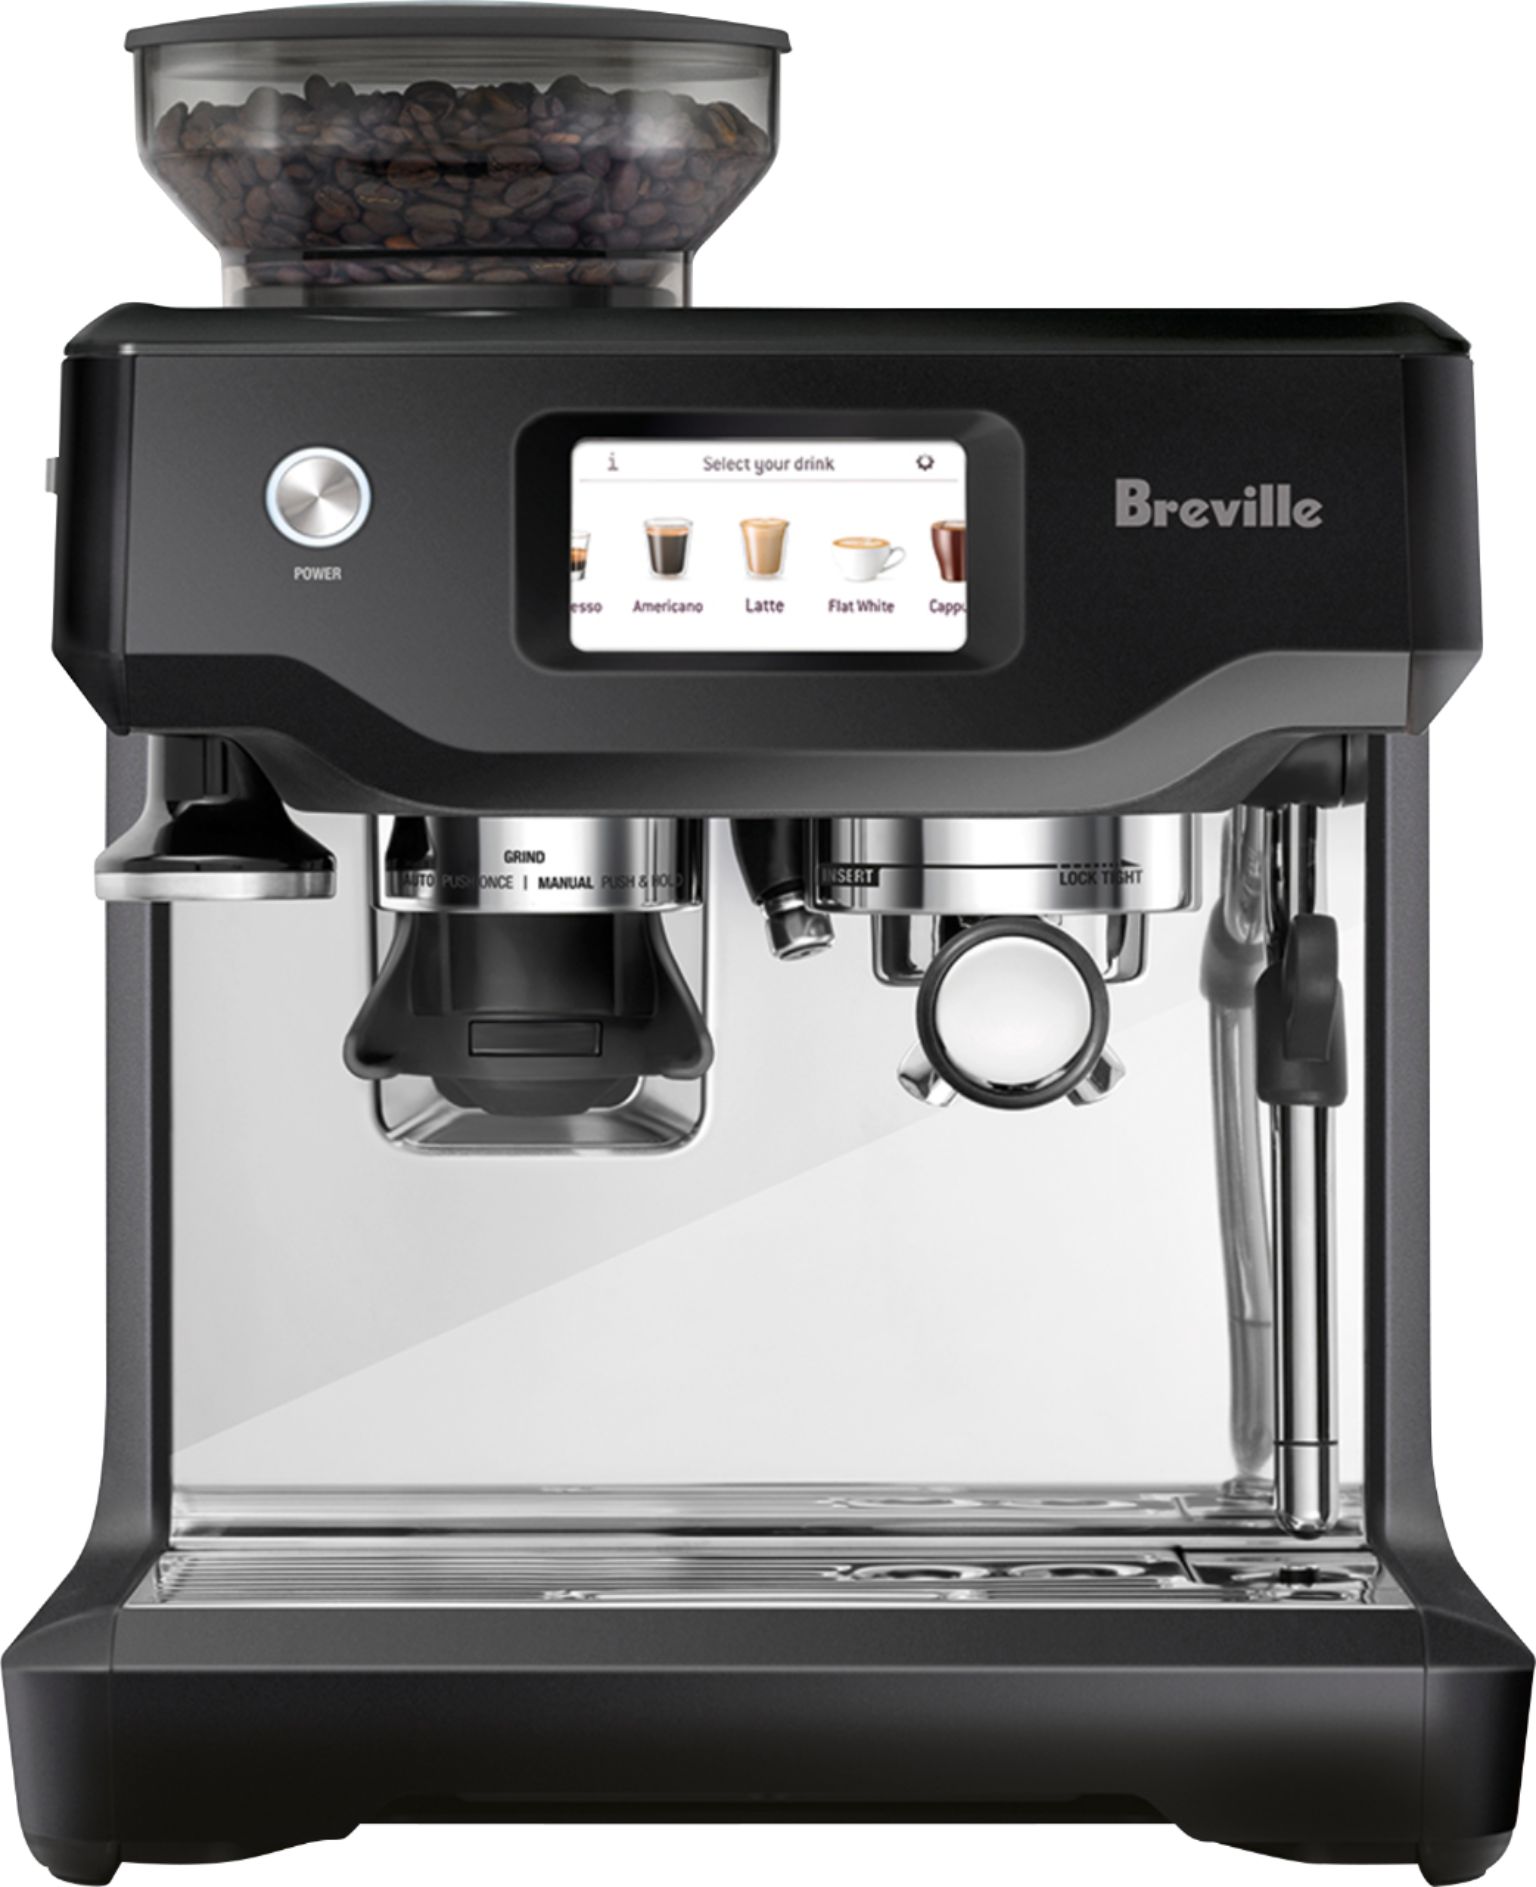 Breville - the Barista Touch Espresso Machine with 15 bars of pressure, Milk Frother and intergrated grinder - Black Truffle